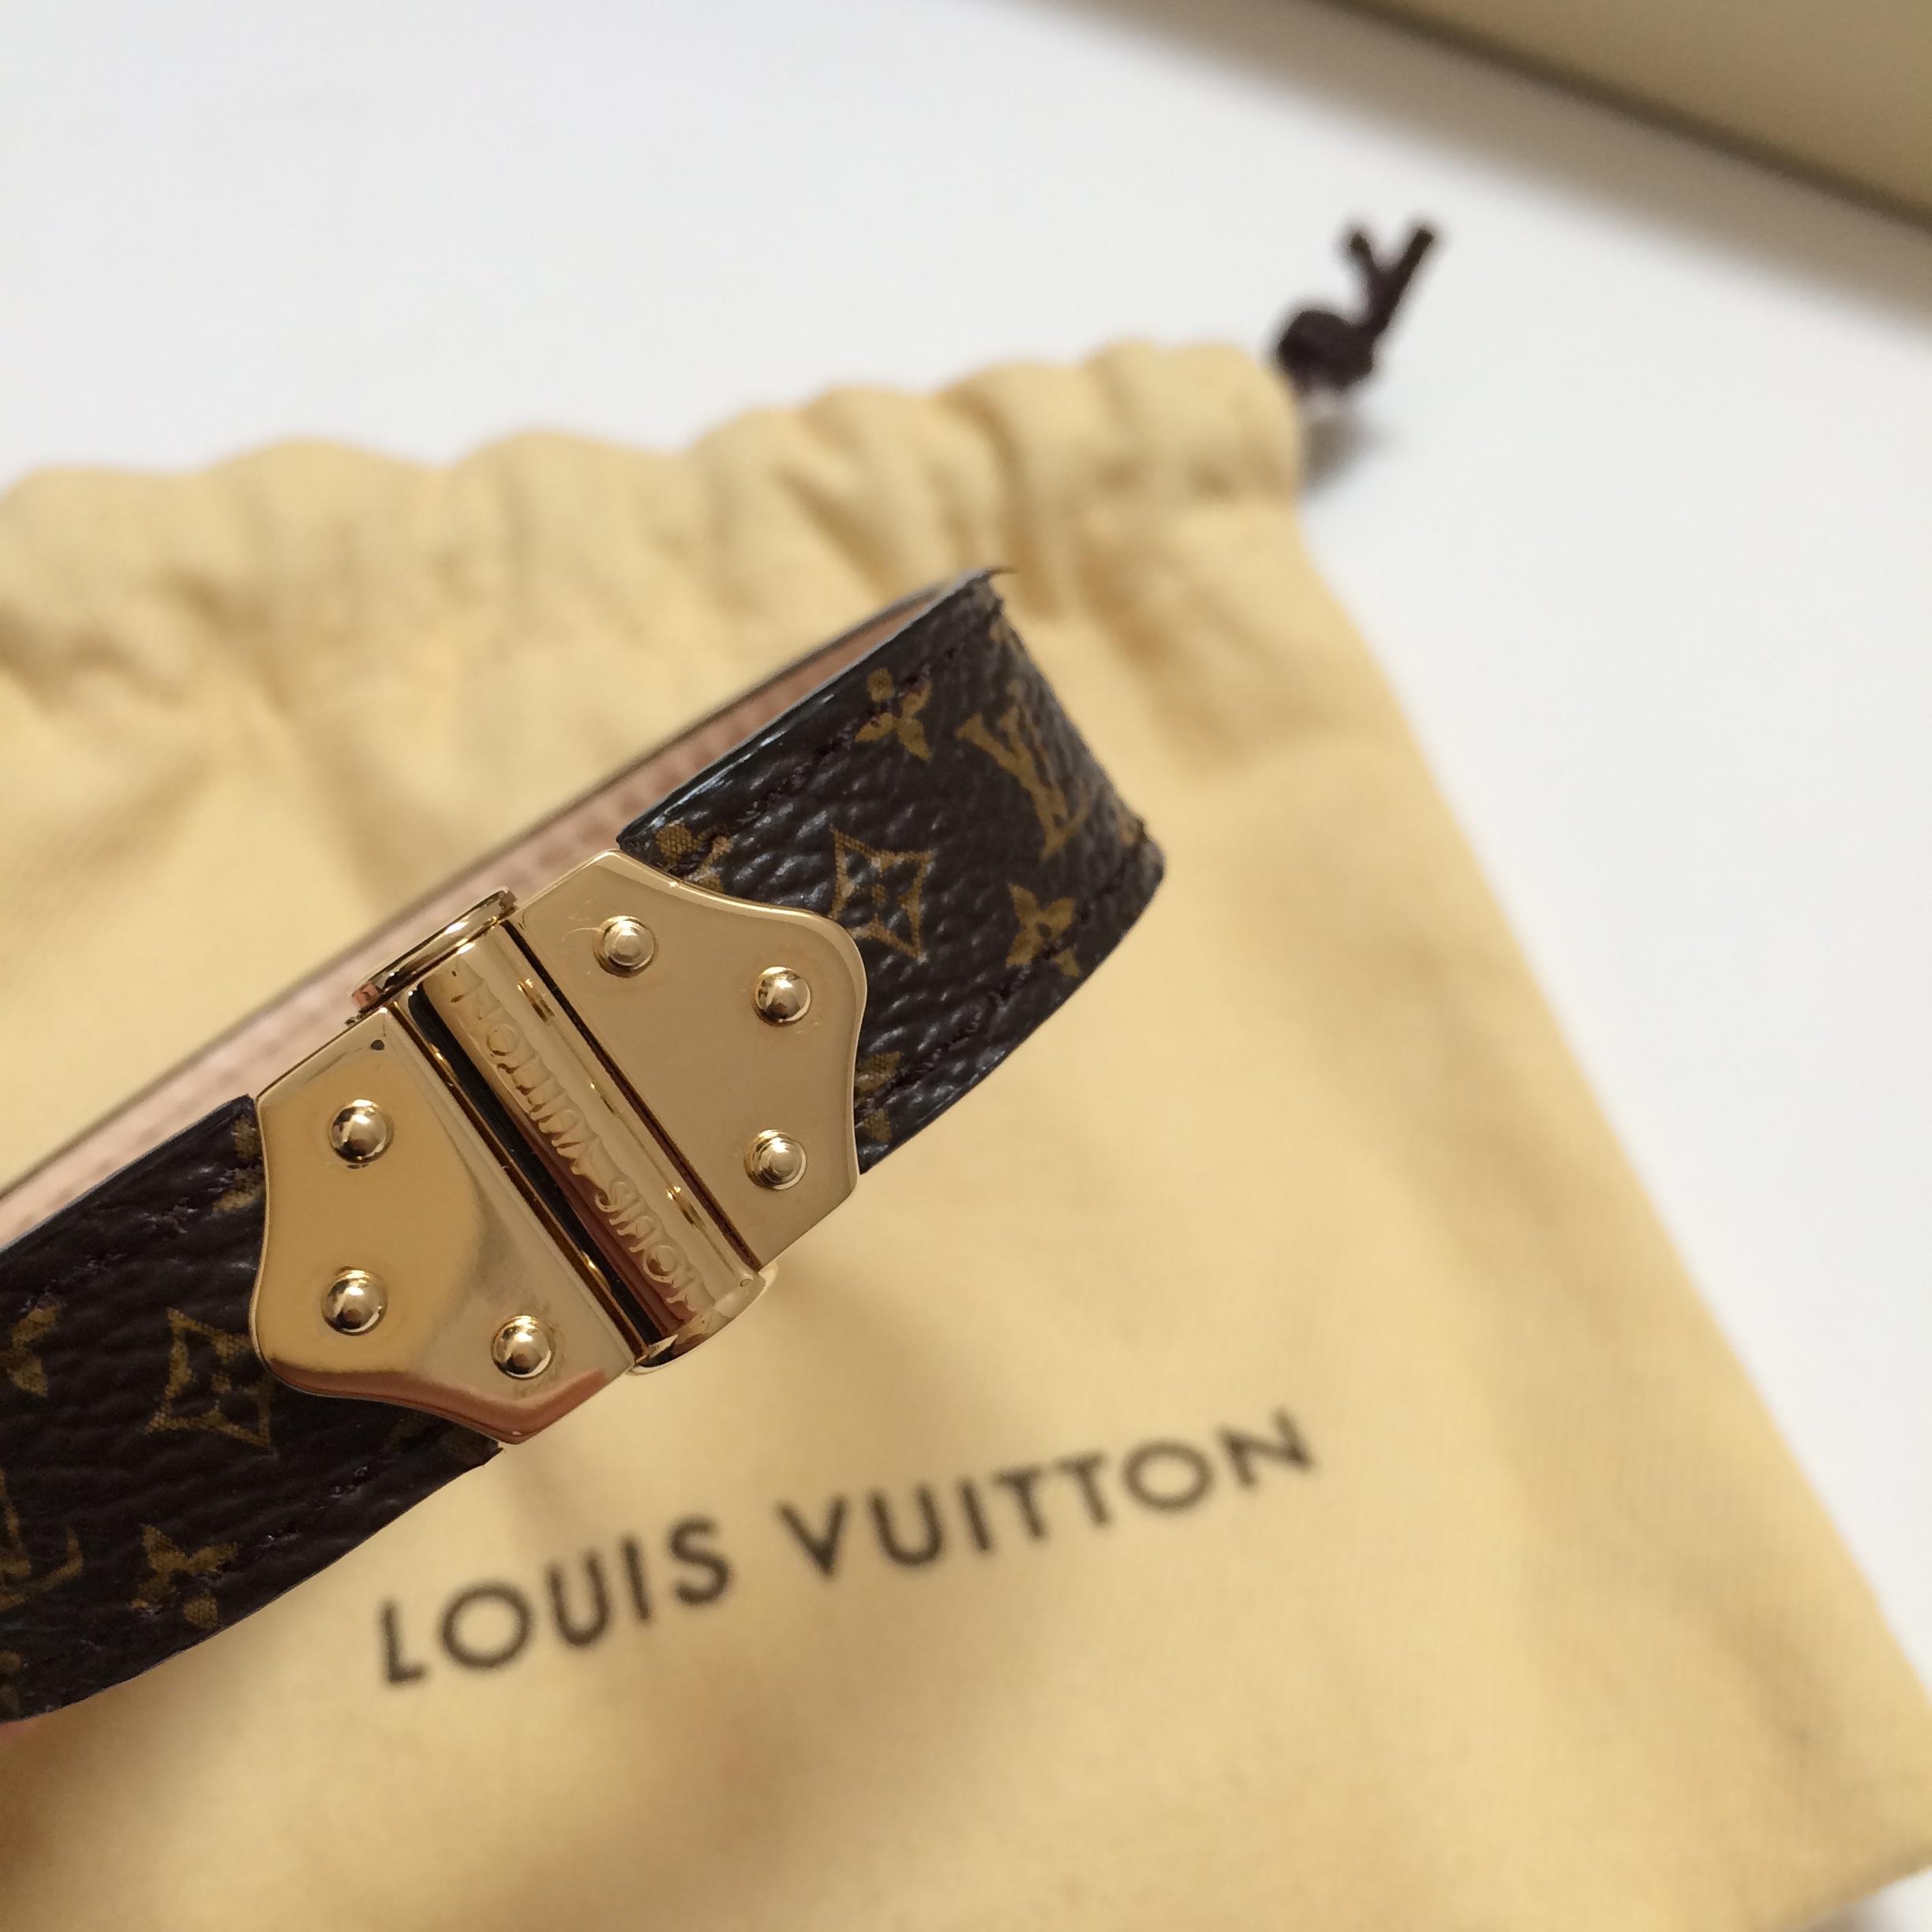 Louis Vuitton Handset Review and Unboxing 